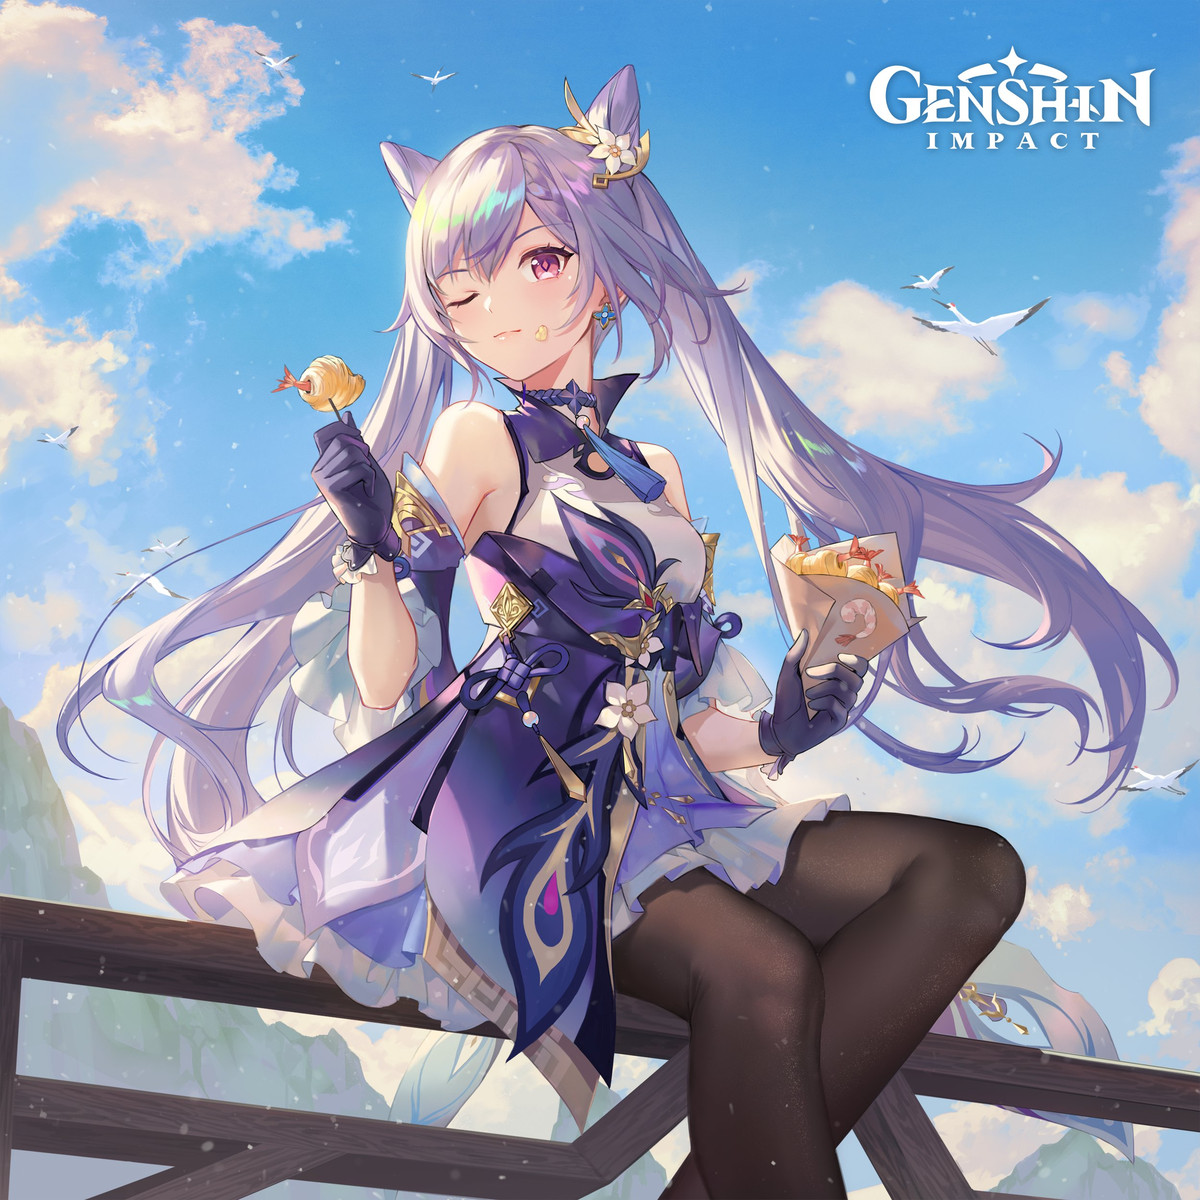 Keqing winks and strikes a pose while sitting on a fence in a promotional image for Genshin Impact